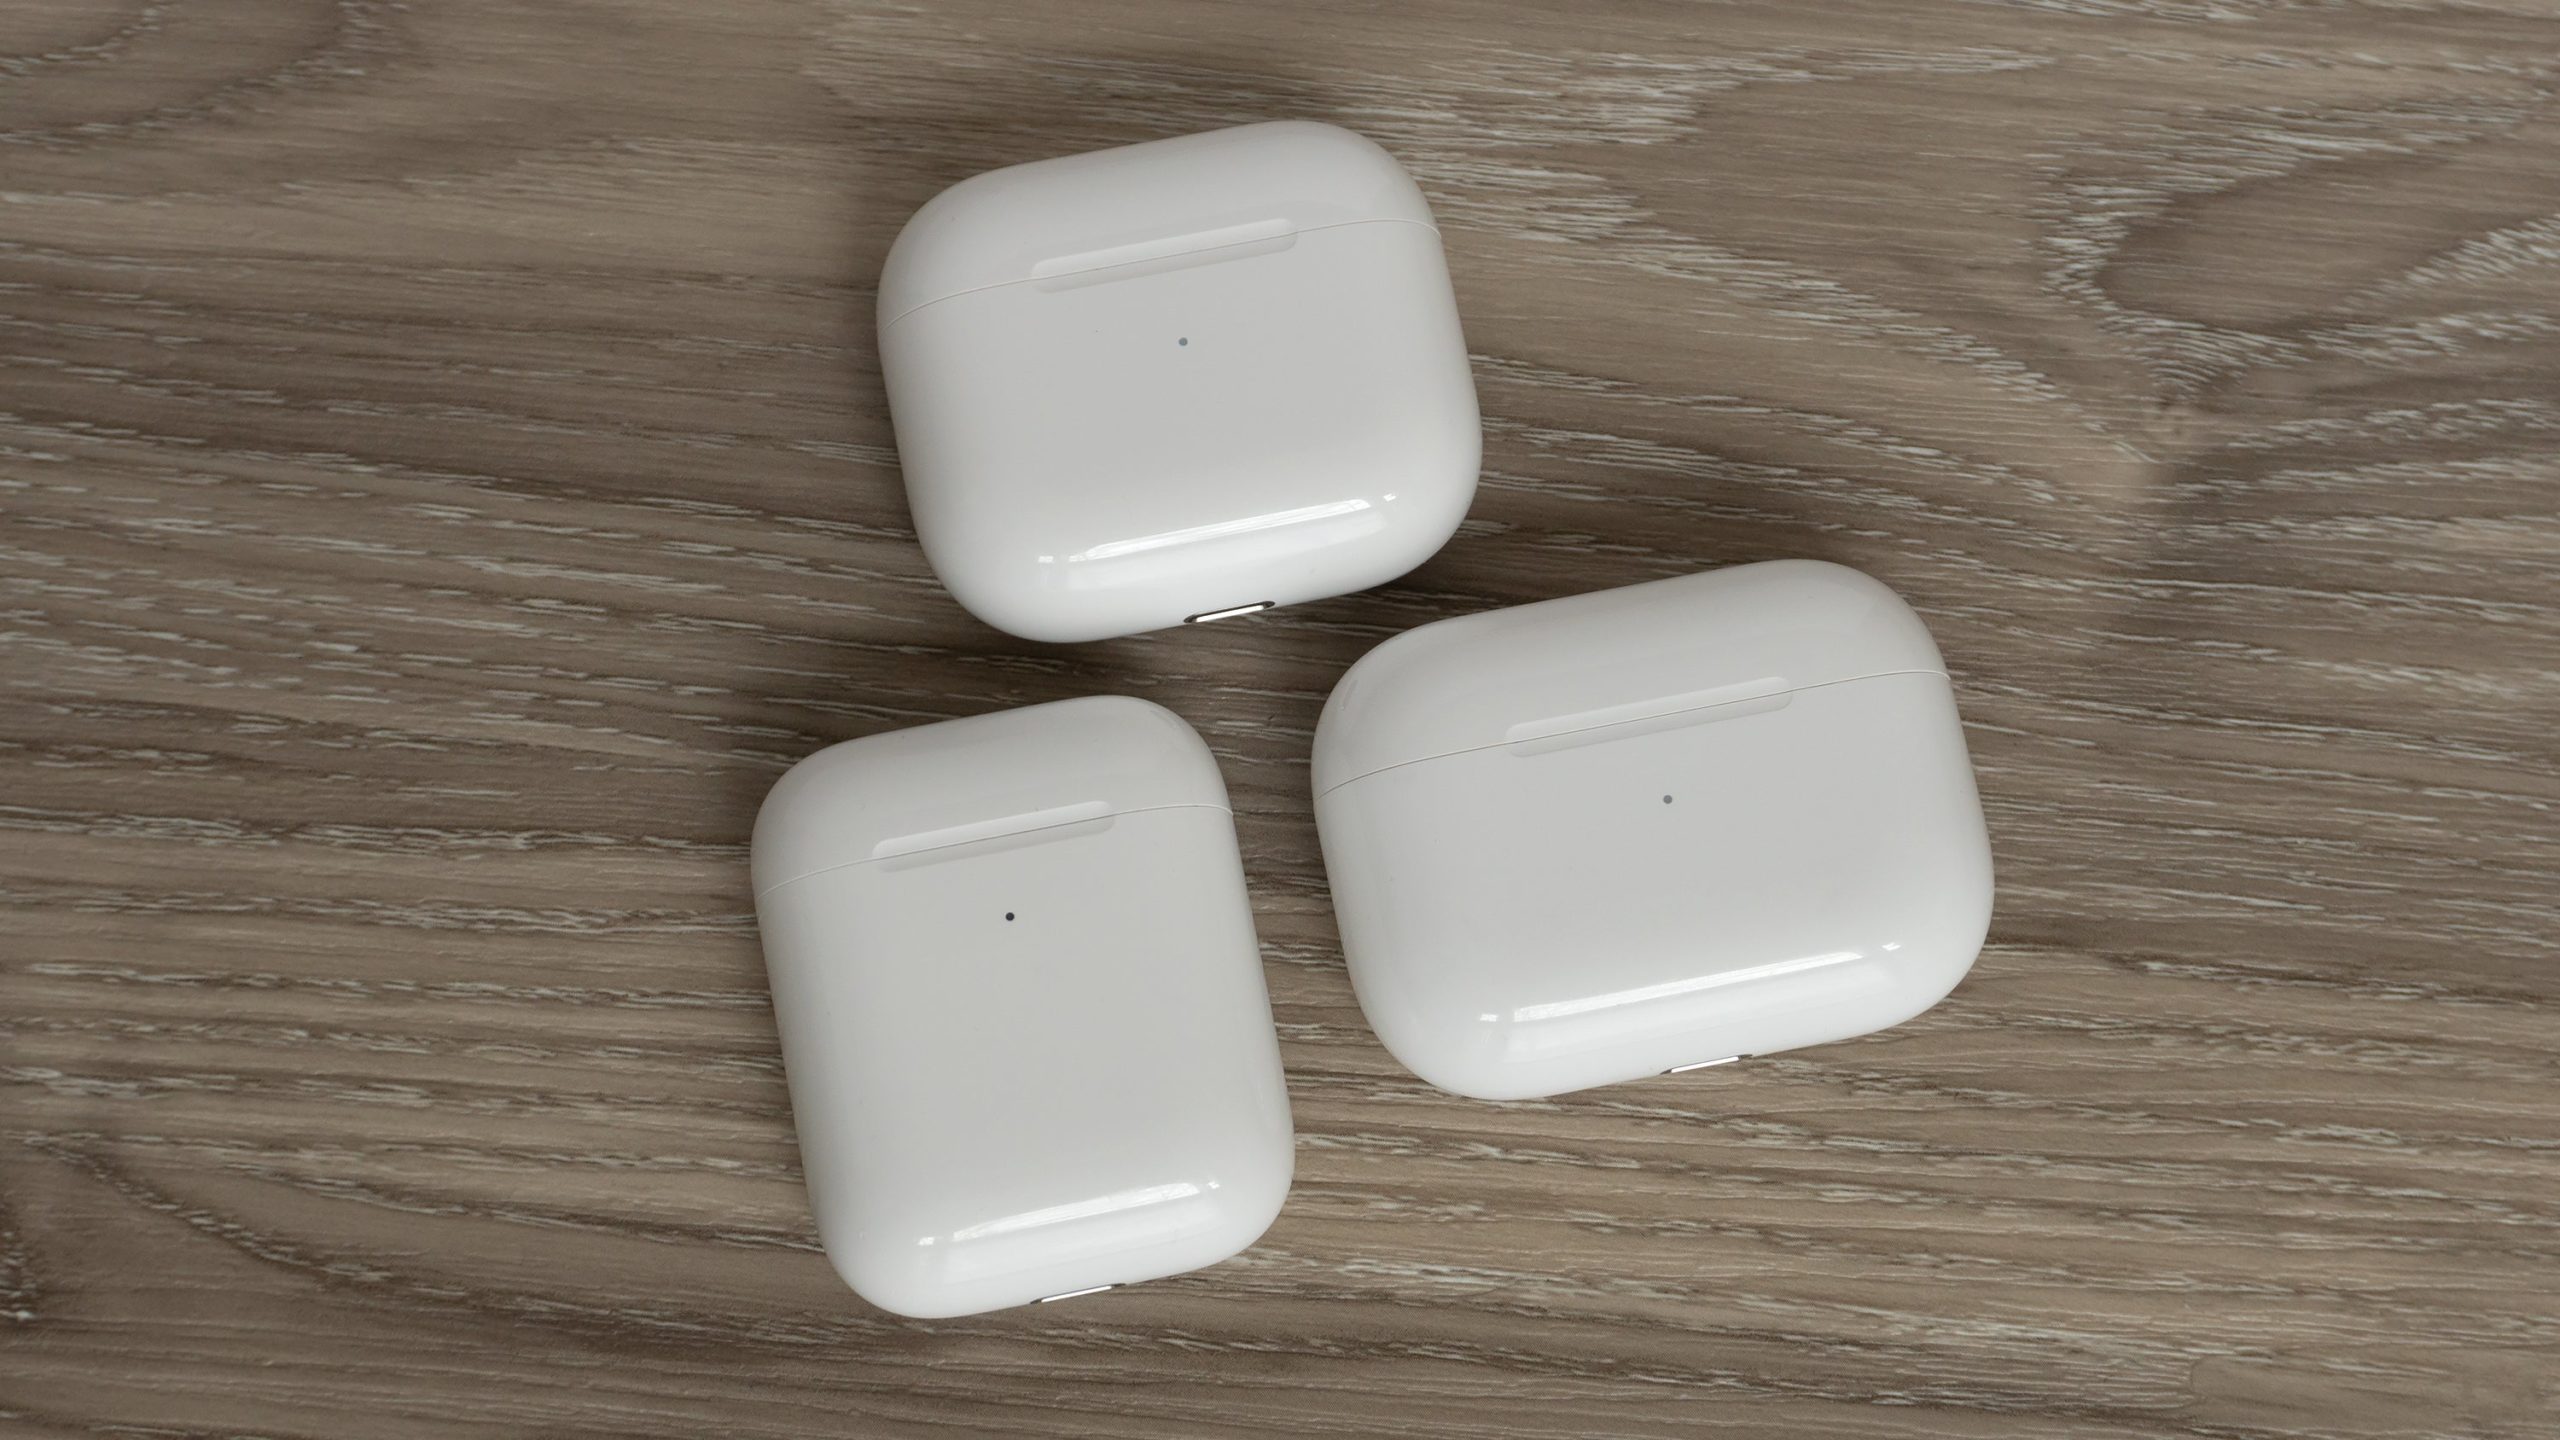 The third-gen AirPods charging case (top) compared to the second-gen charging case (bottom left) and the AirPods Pro charging case (bottom right). (Photo: Andrew Liszewski - Gizmodo)